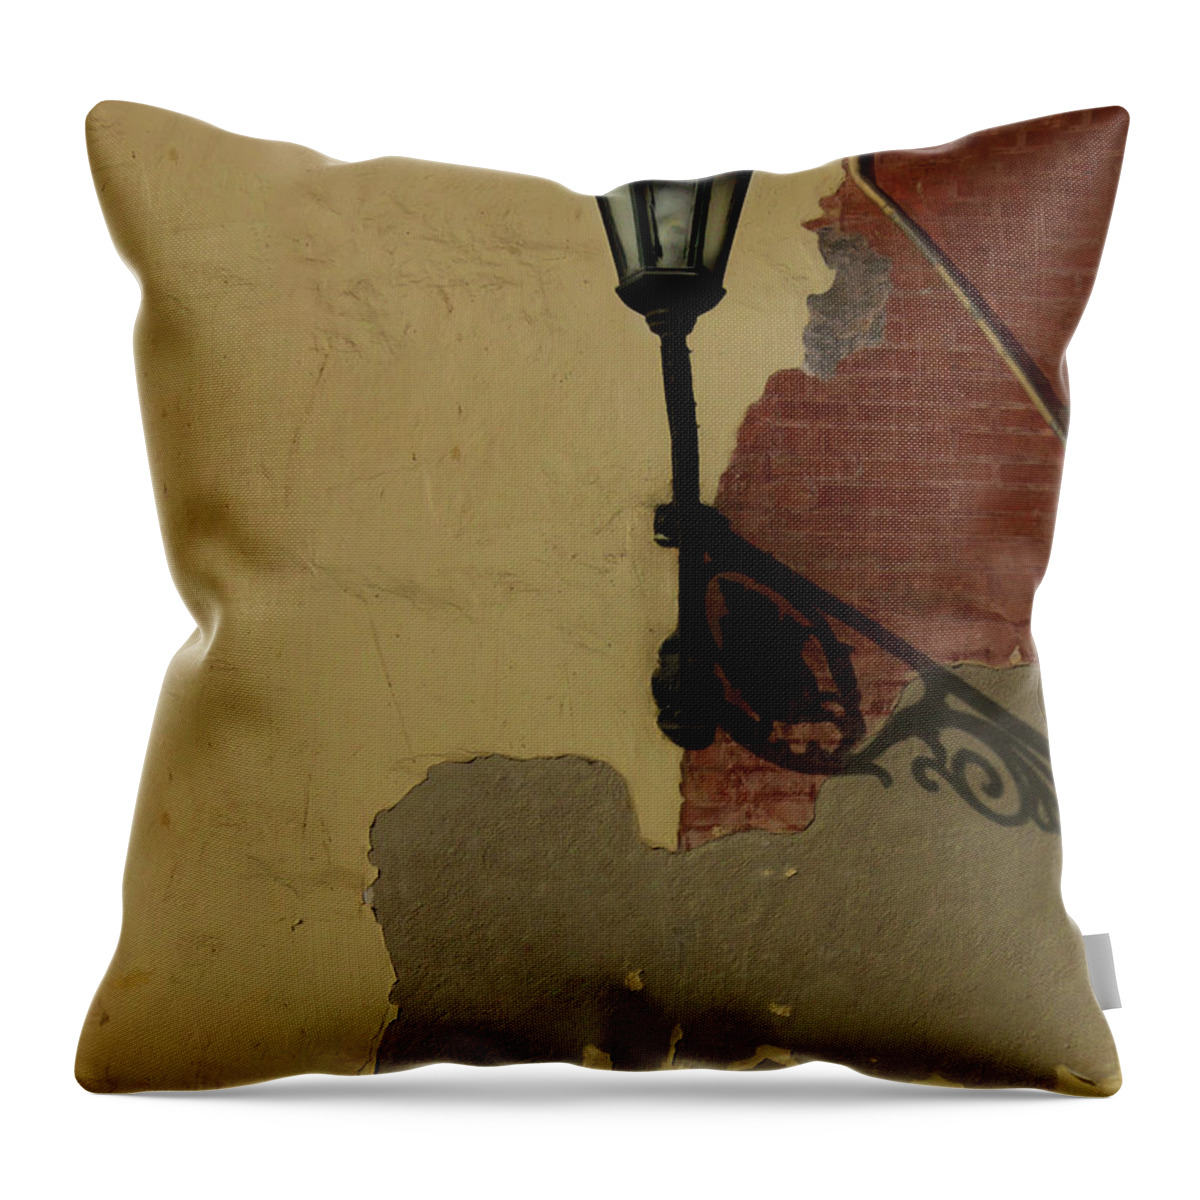 Luz Y Sombra Abstracted Throw Pillow featuring the photograph Luz Y Sombra Abstracted by Kandy Hurley